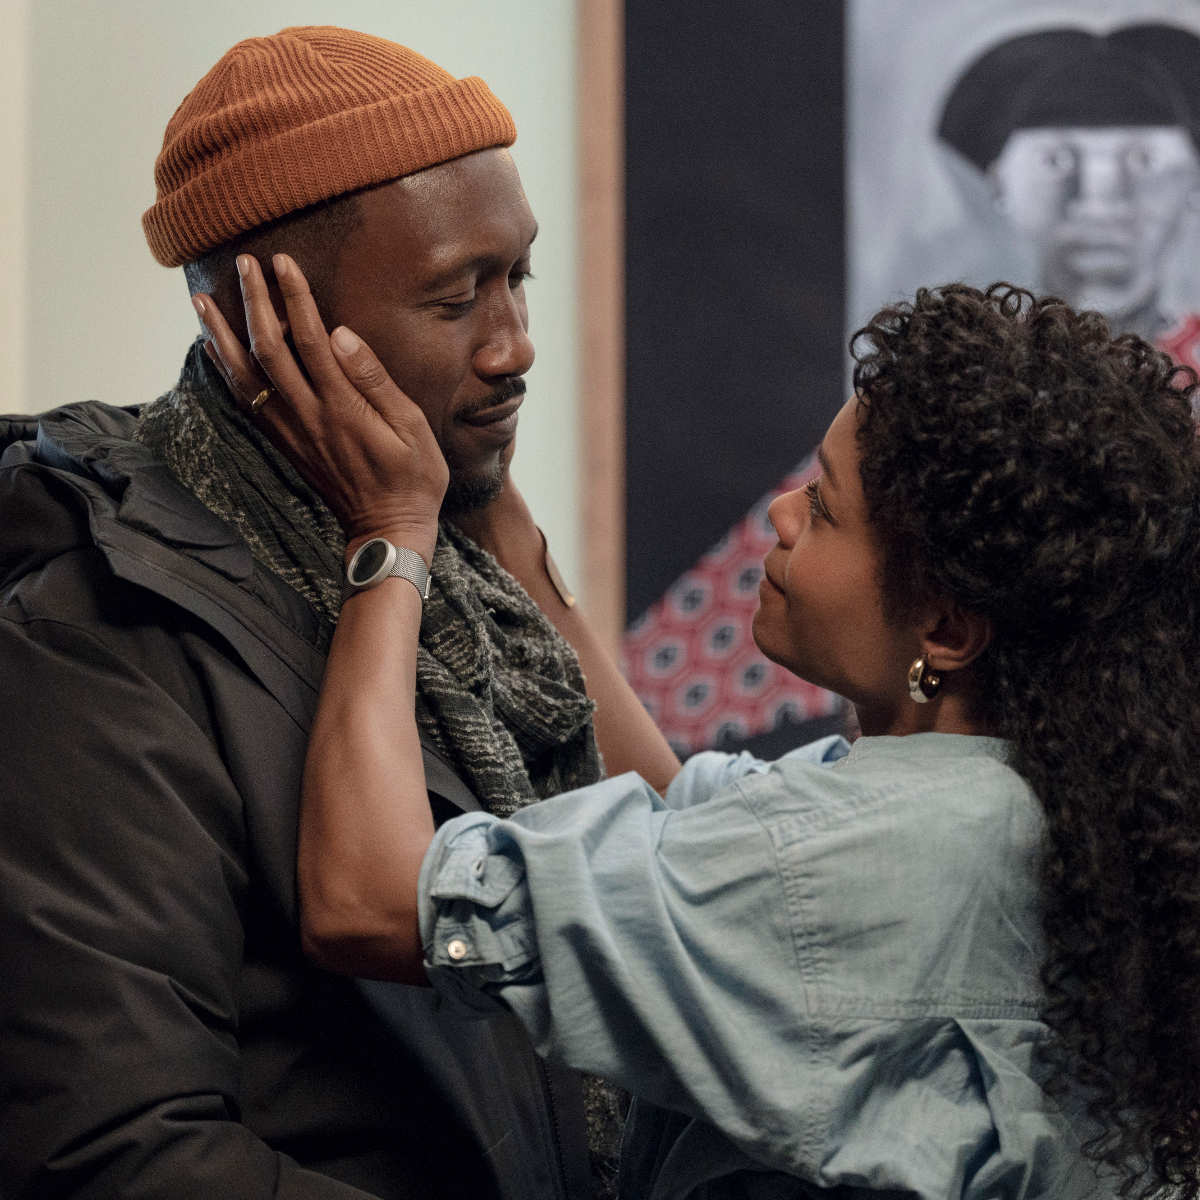 EXCLUSIVE: Mahershala Ali and Naomie Harris speak candidly on what Swan Song taught them about handling grief